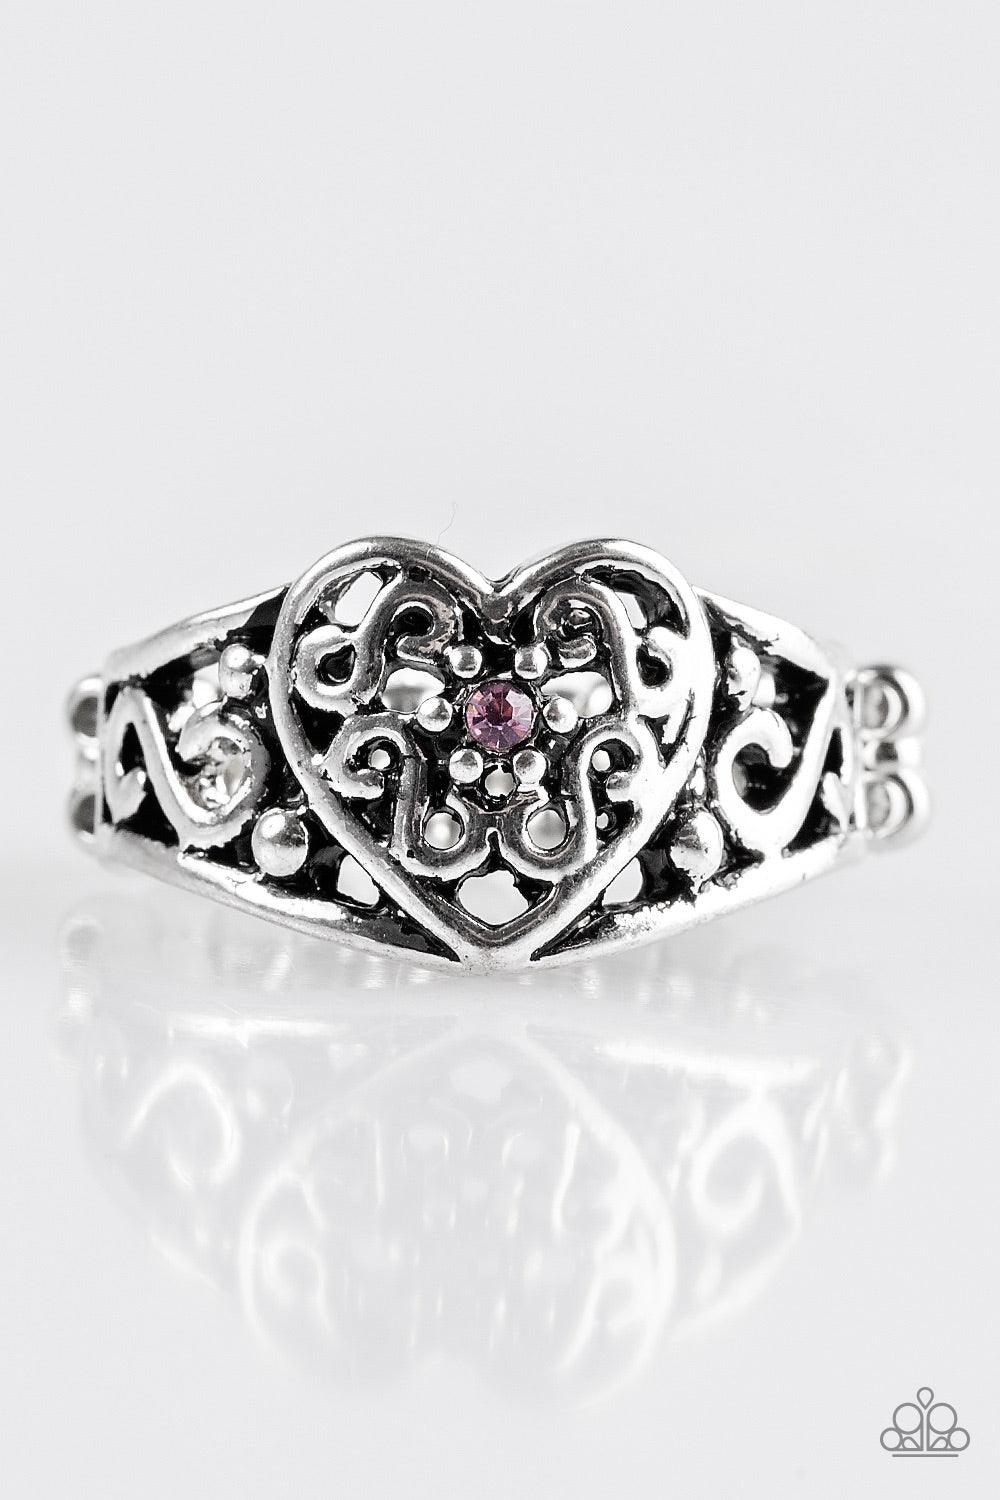 Paparazzi Accessories Dearly Beloved - Purple A dainty purple rhinestone dots the center of an ornate heart frame for a vintage inspired look. Features a dainty stretchy band for a flexible fit. Jewelry